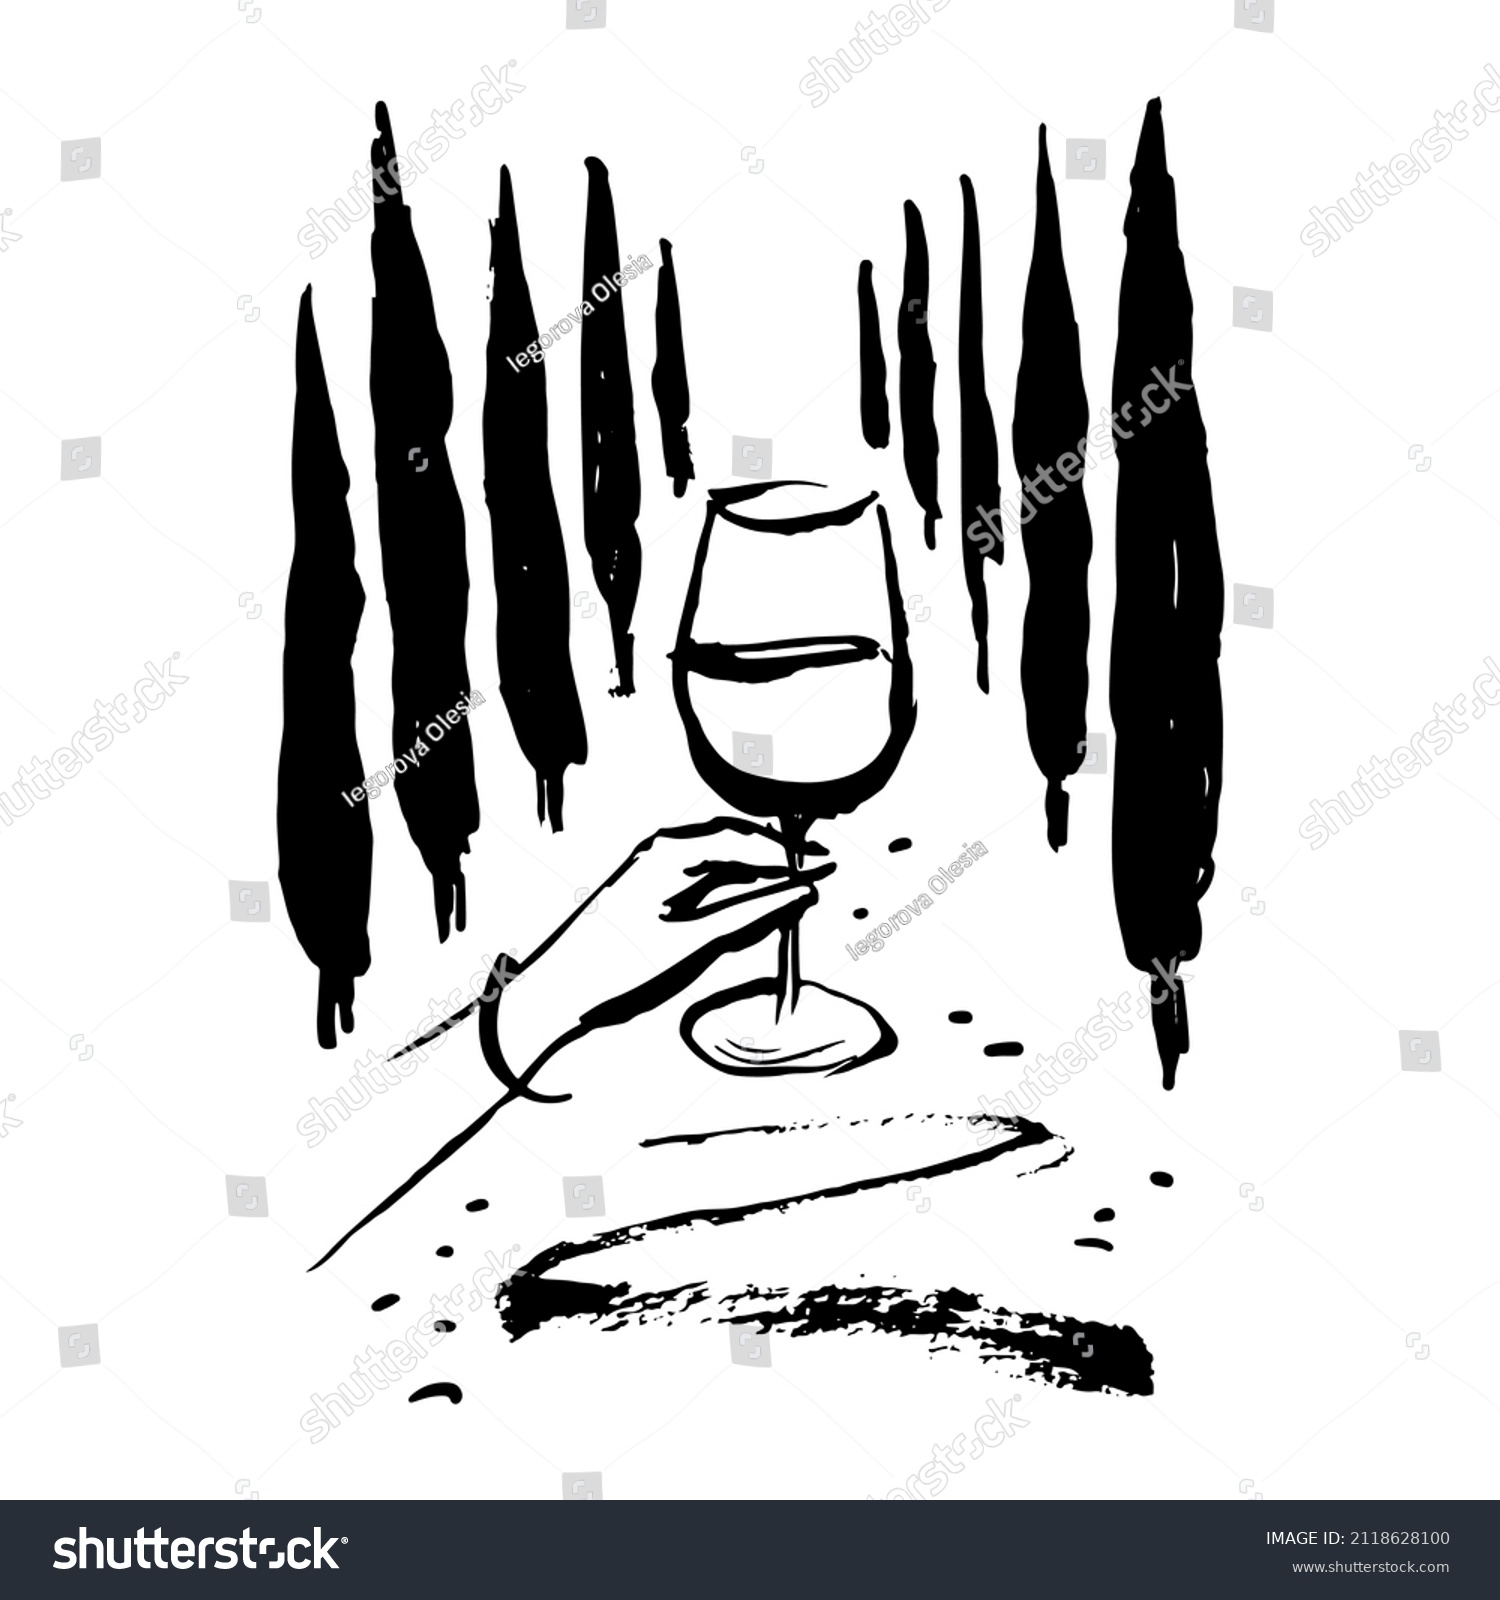 SVG of A glass of wine in hand against the backdrop of Tuscany cypresses. Ink illustration. svg